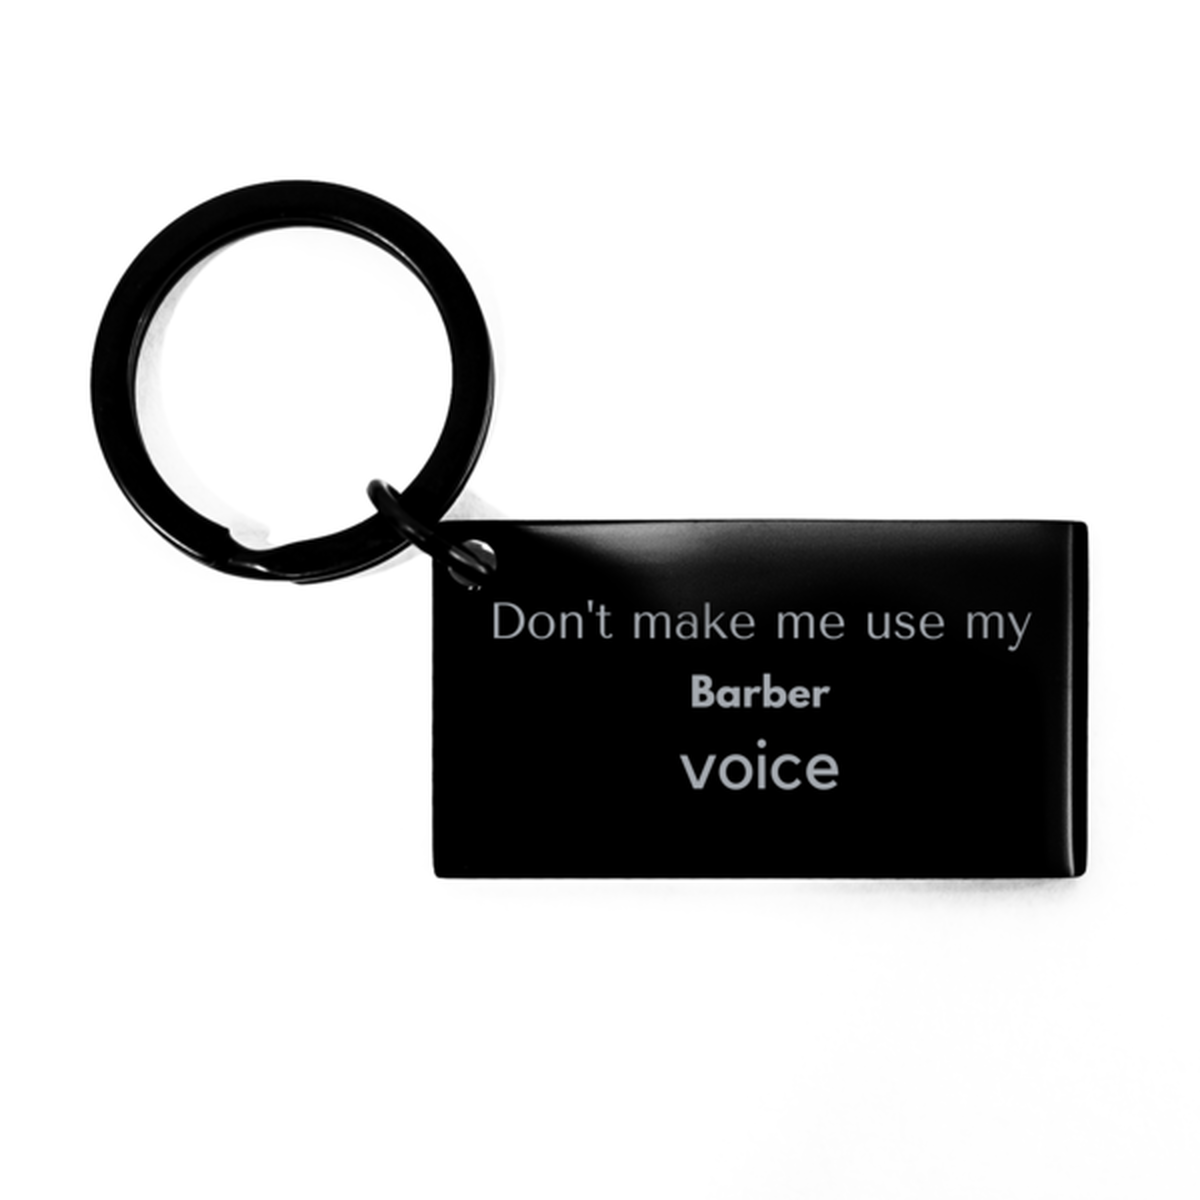 Don't make me use my Barber voice, Sarcasm Barber Gifts, Christmas Barber Keychain Birthday Unique Gifts For Barber Coworkers, Men, Women, Colleague, Friends